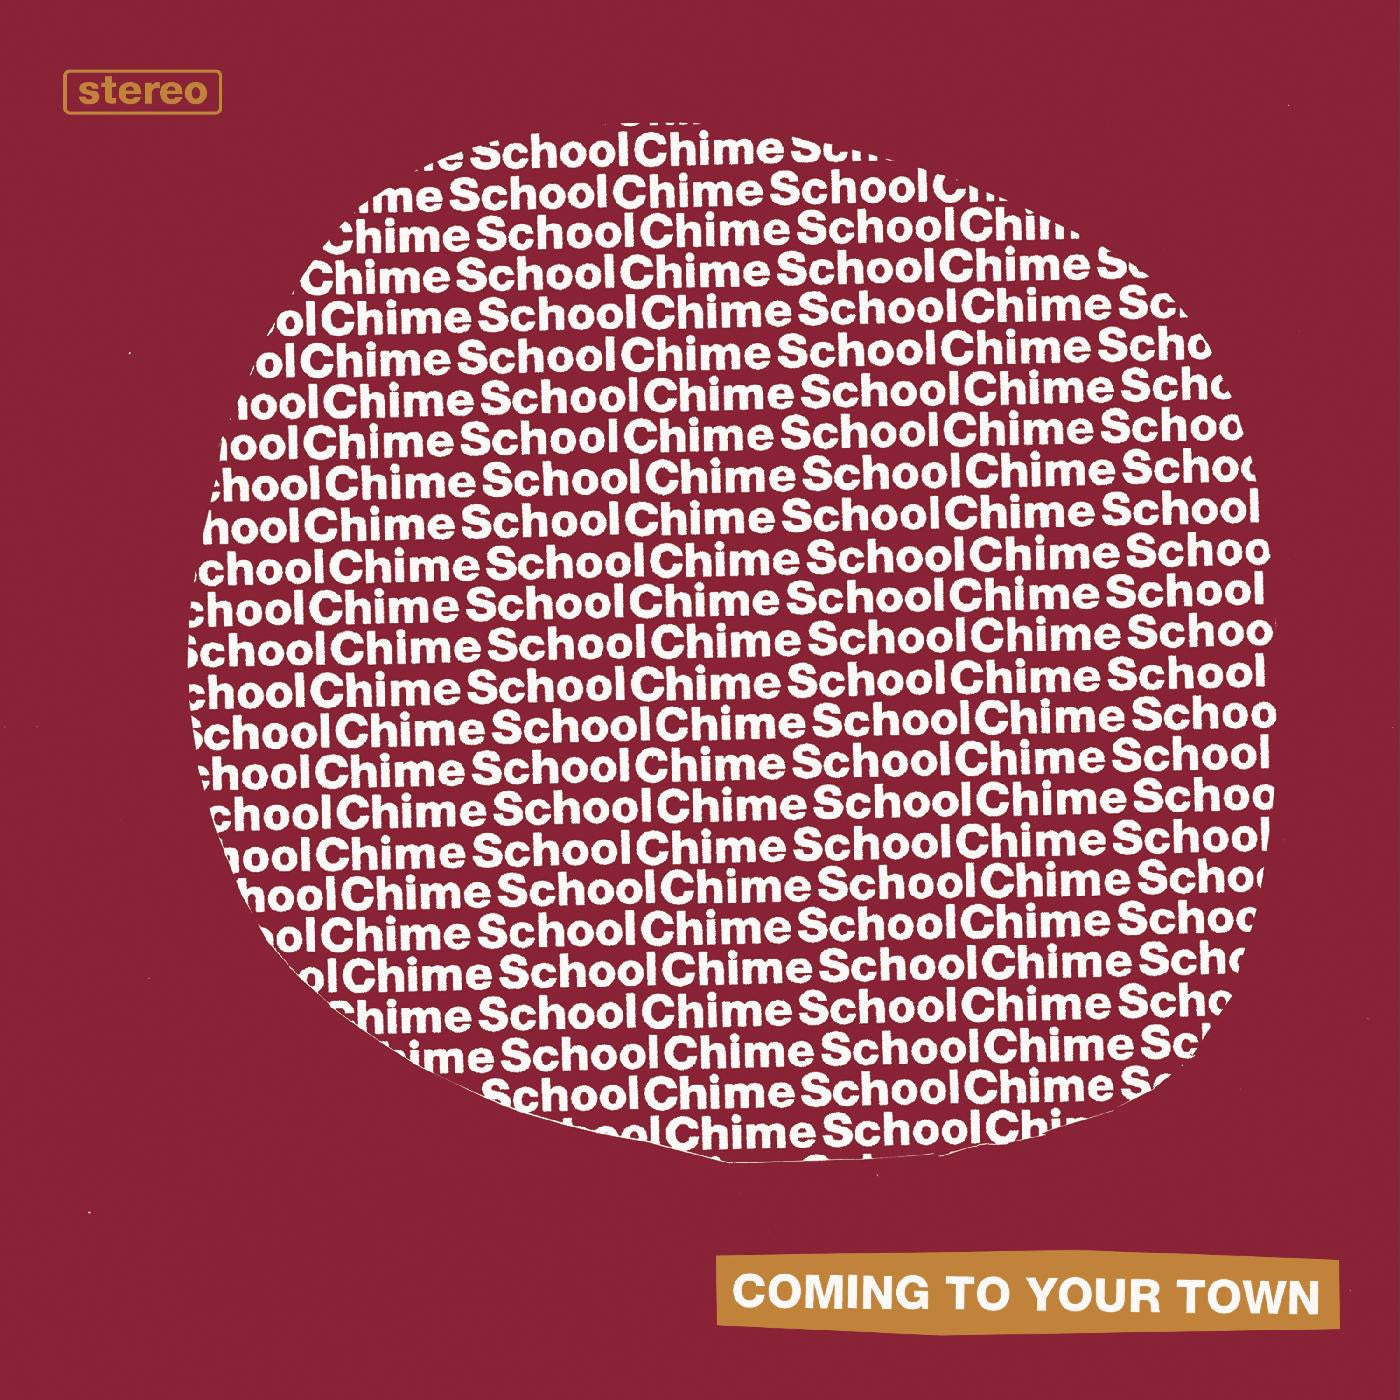 CHIME SCHOOL - COMING TO YOUR TOWN Vinyl 7"